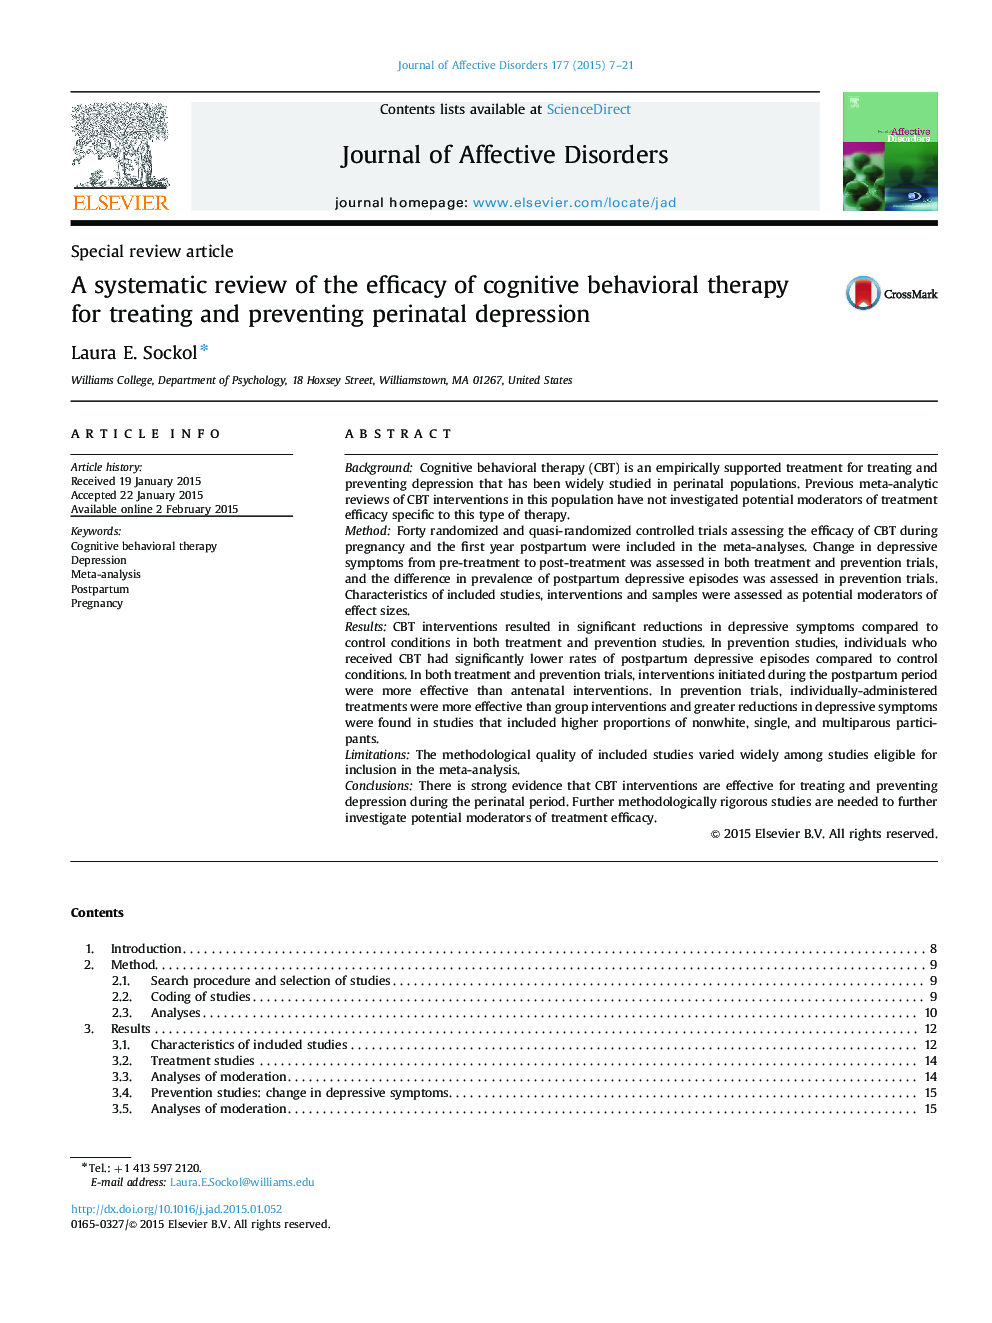 A systematic review of the efficacy of cognitive behavioral therapy for treating and preventing perinatal depression